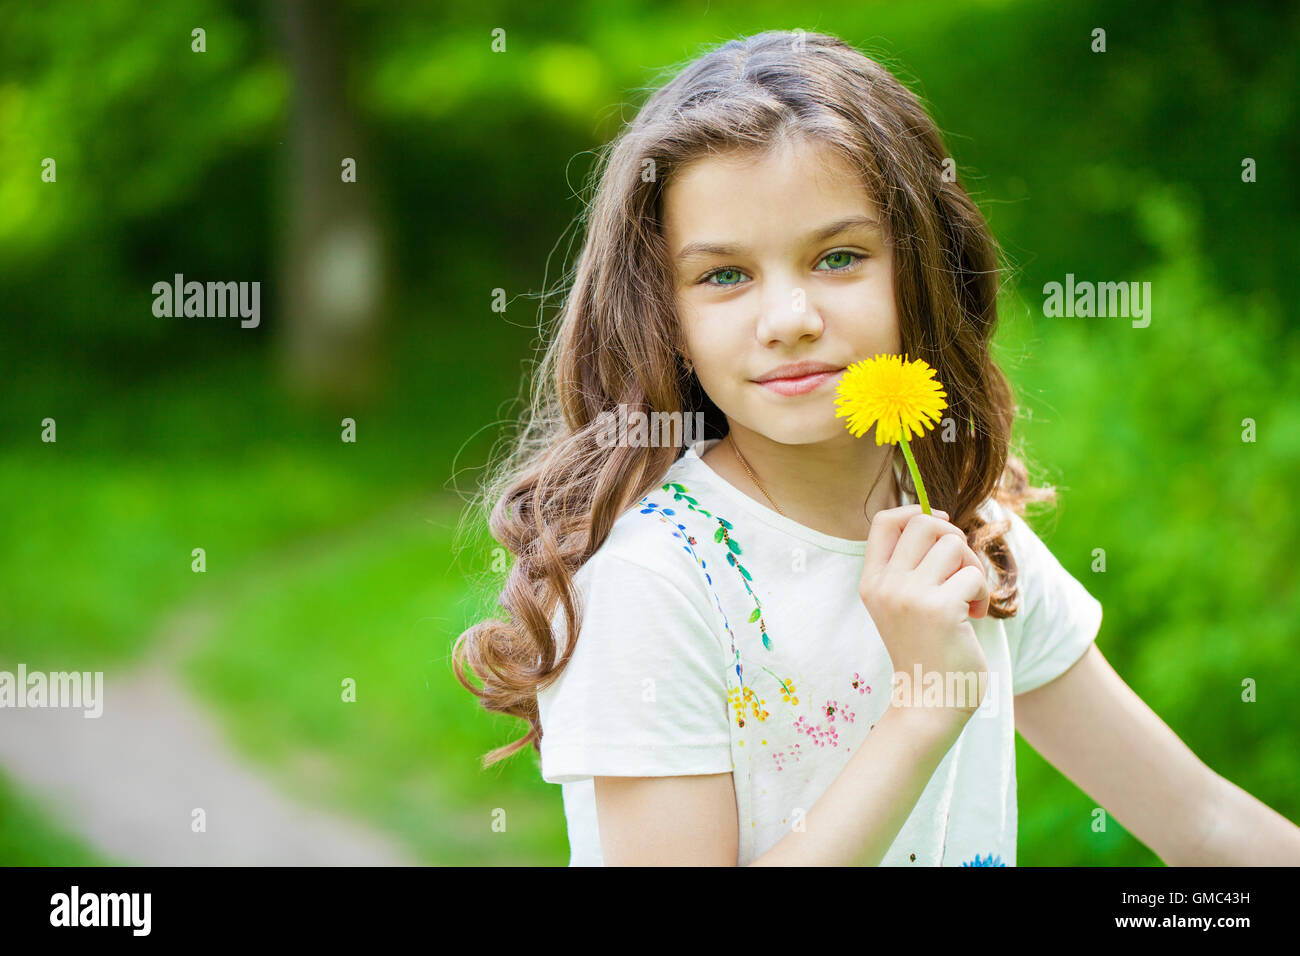 9+ Thousand Cute 10 Year Old Girl Royalty-Free Images, Stock Photos &  Pictures